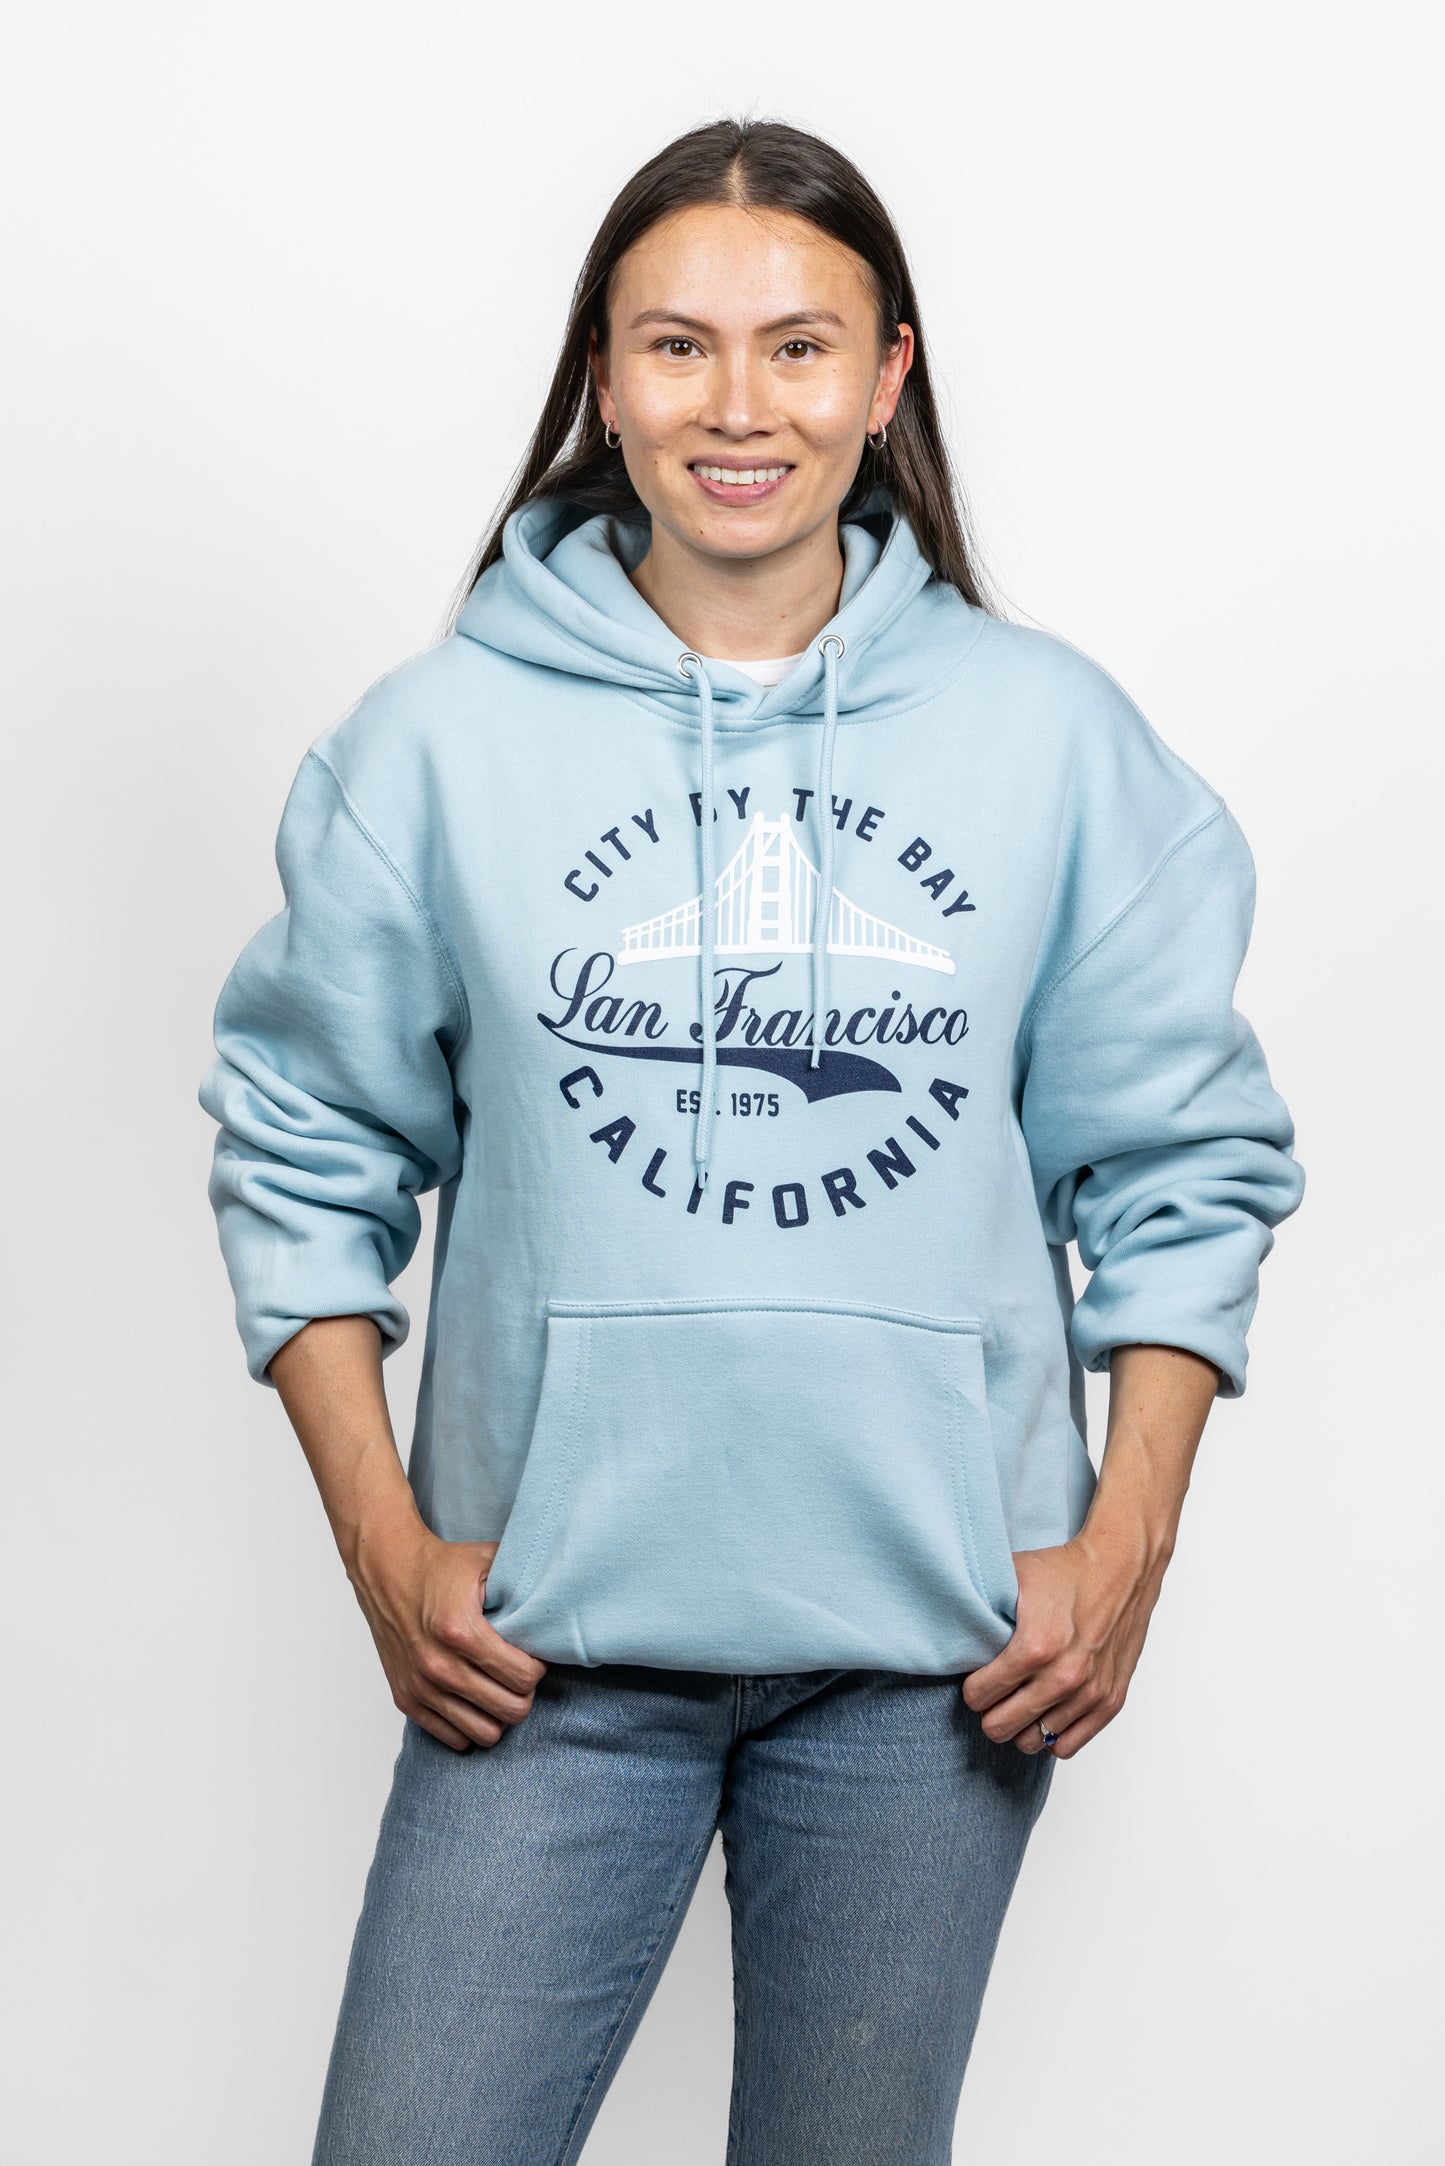 City By The Bay Hoodie